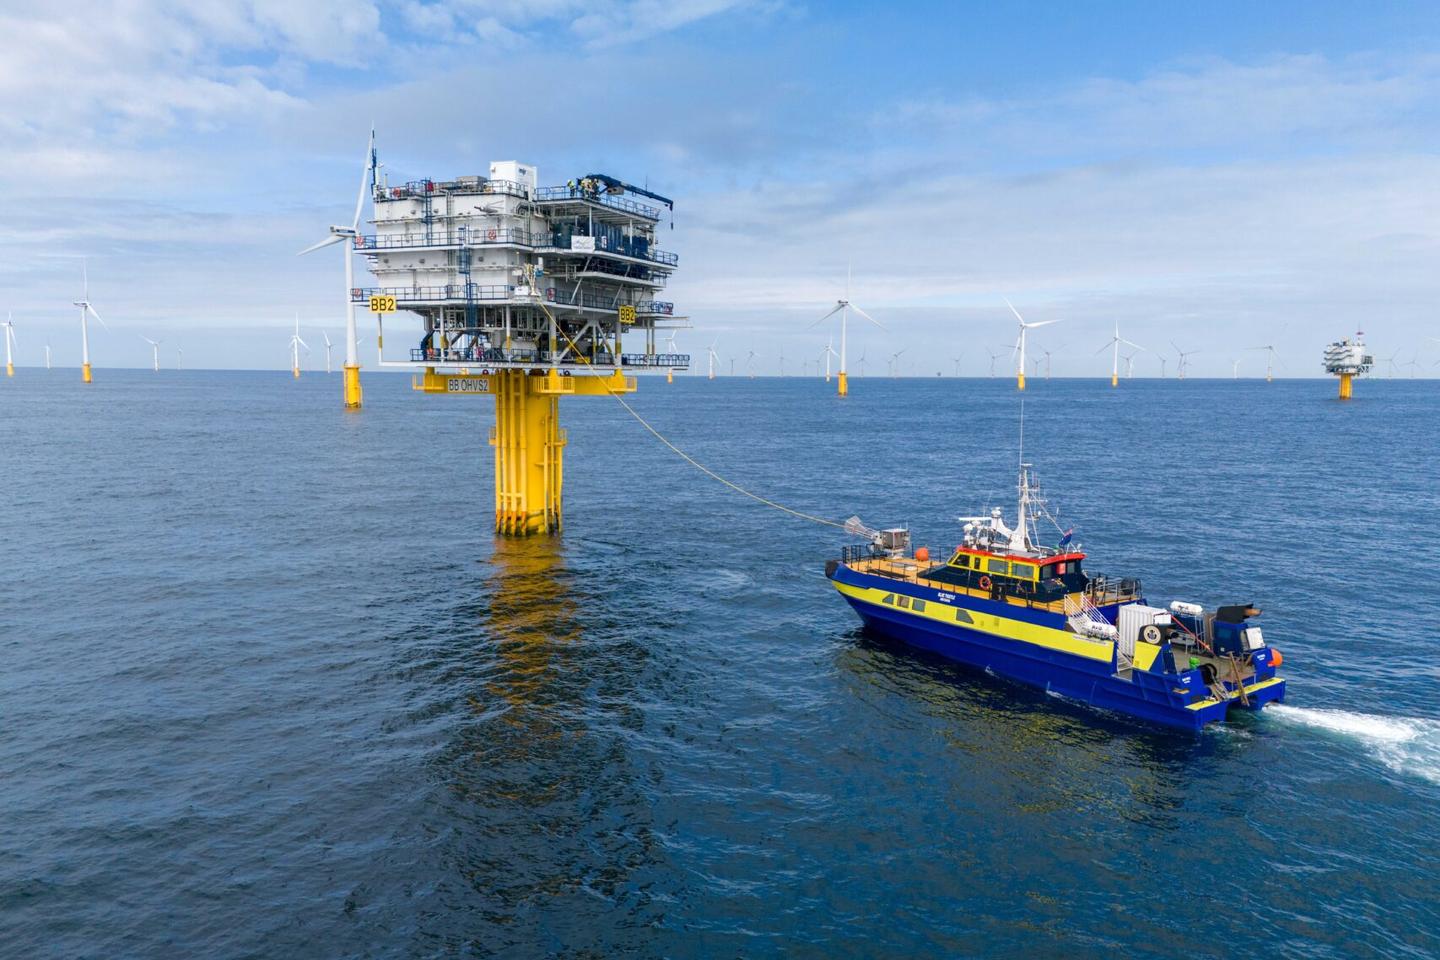 Video: Offshore wind farm charges floating boats in world first